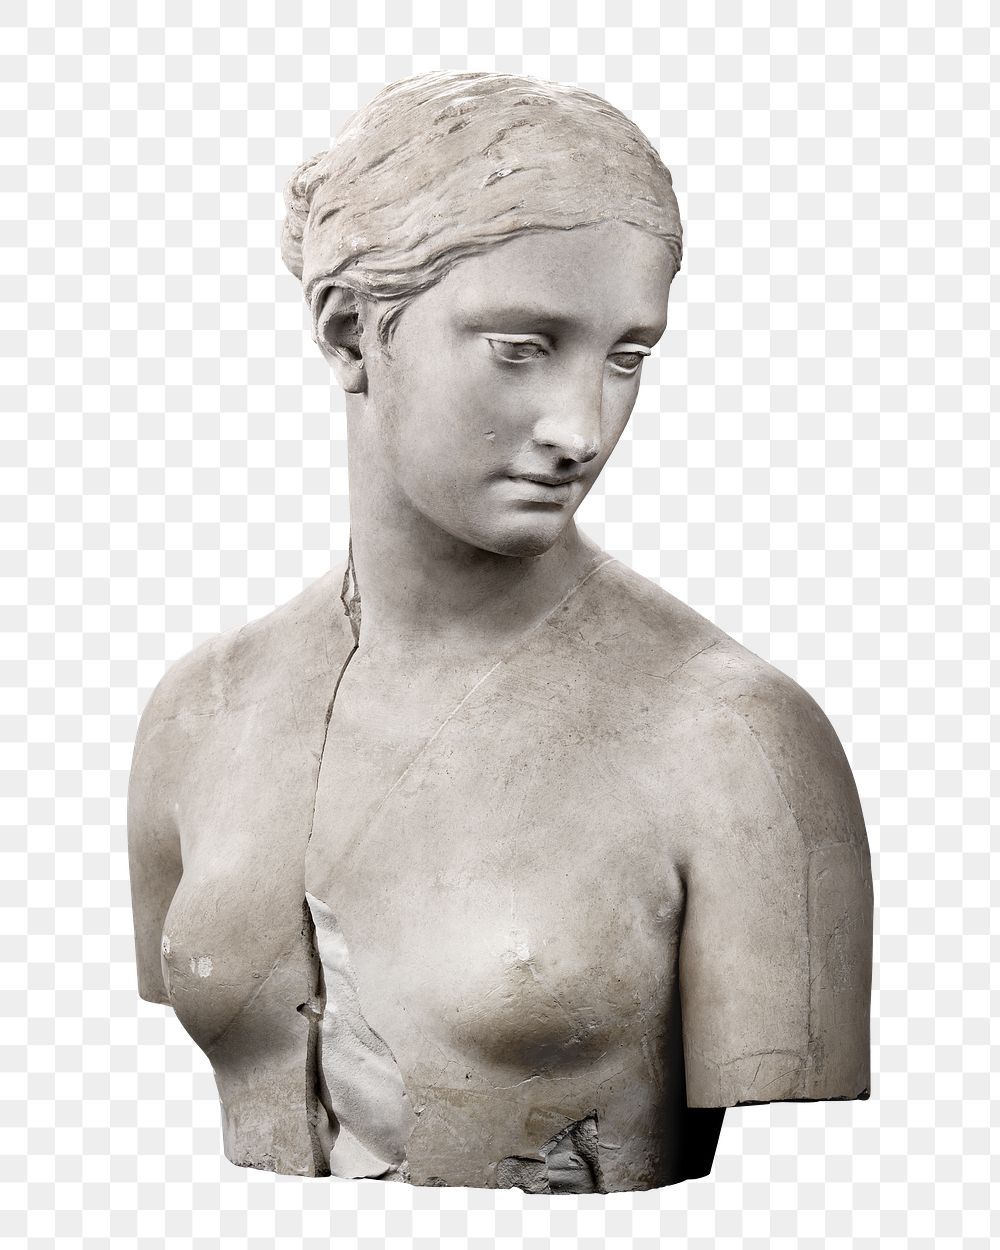 Greek Slave png sculpture by Hiram Powers, transparent background. Remixed by rawpixel.